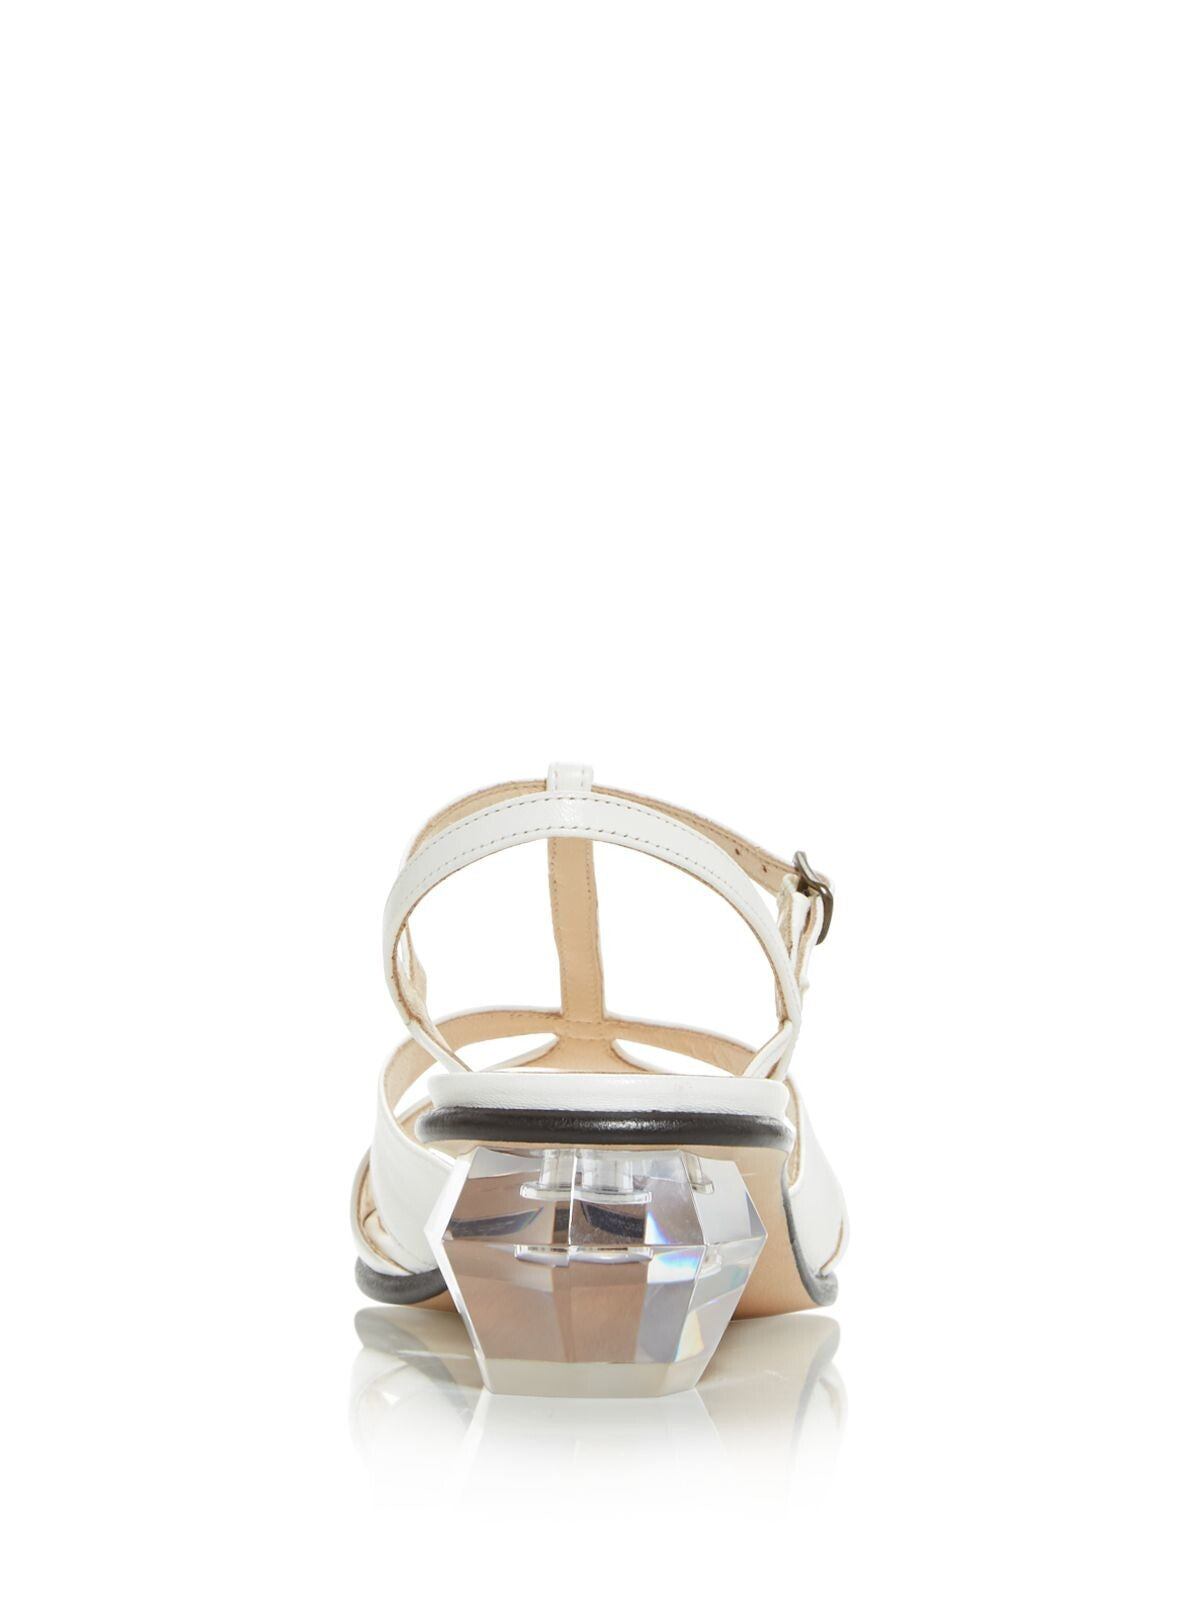 MARC JACOBS Womens White Adjustable Padded T-Strap Strappy The Gem Square Toe Sculpted Heel Buckle Leather Dress Slingback Sandal 36.5